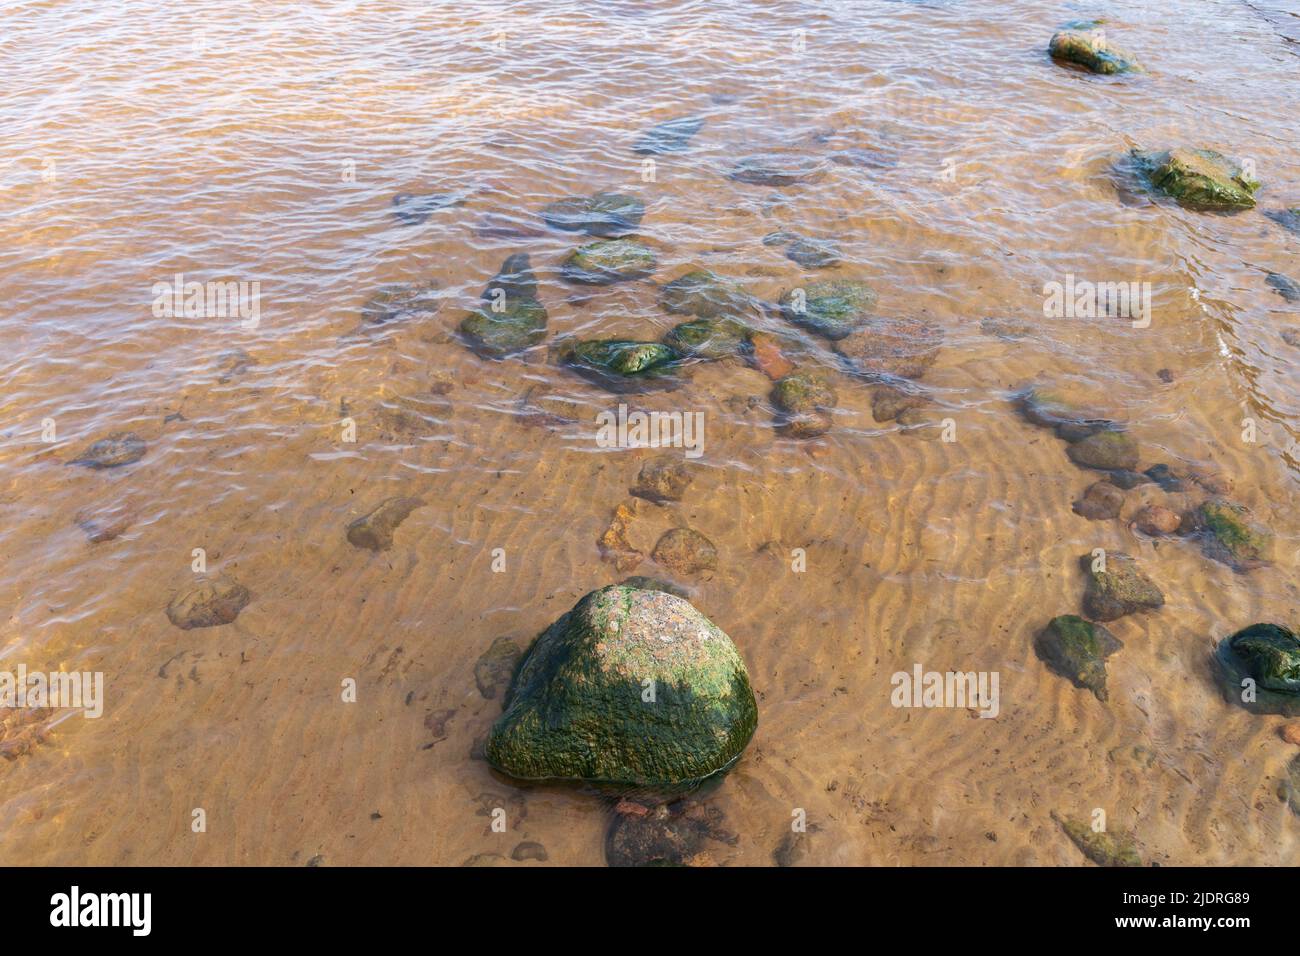 Wet stones with alga are in coastal water. Gulf of Finland, Russia Stock Photo